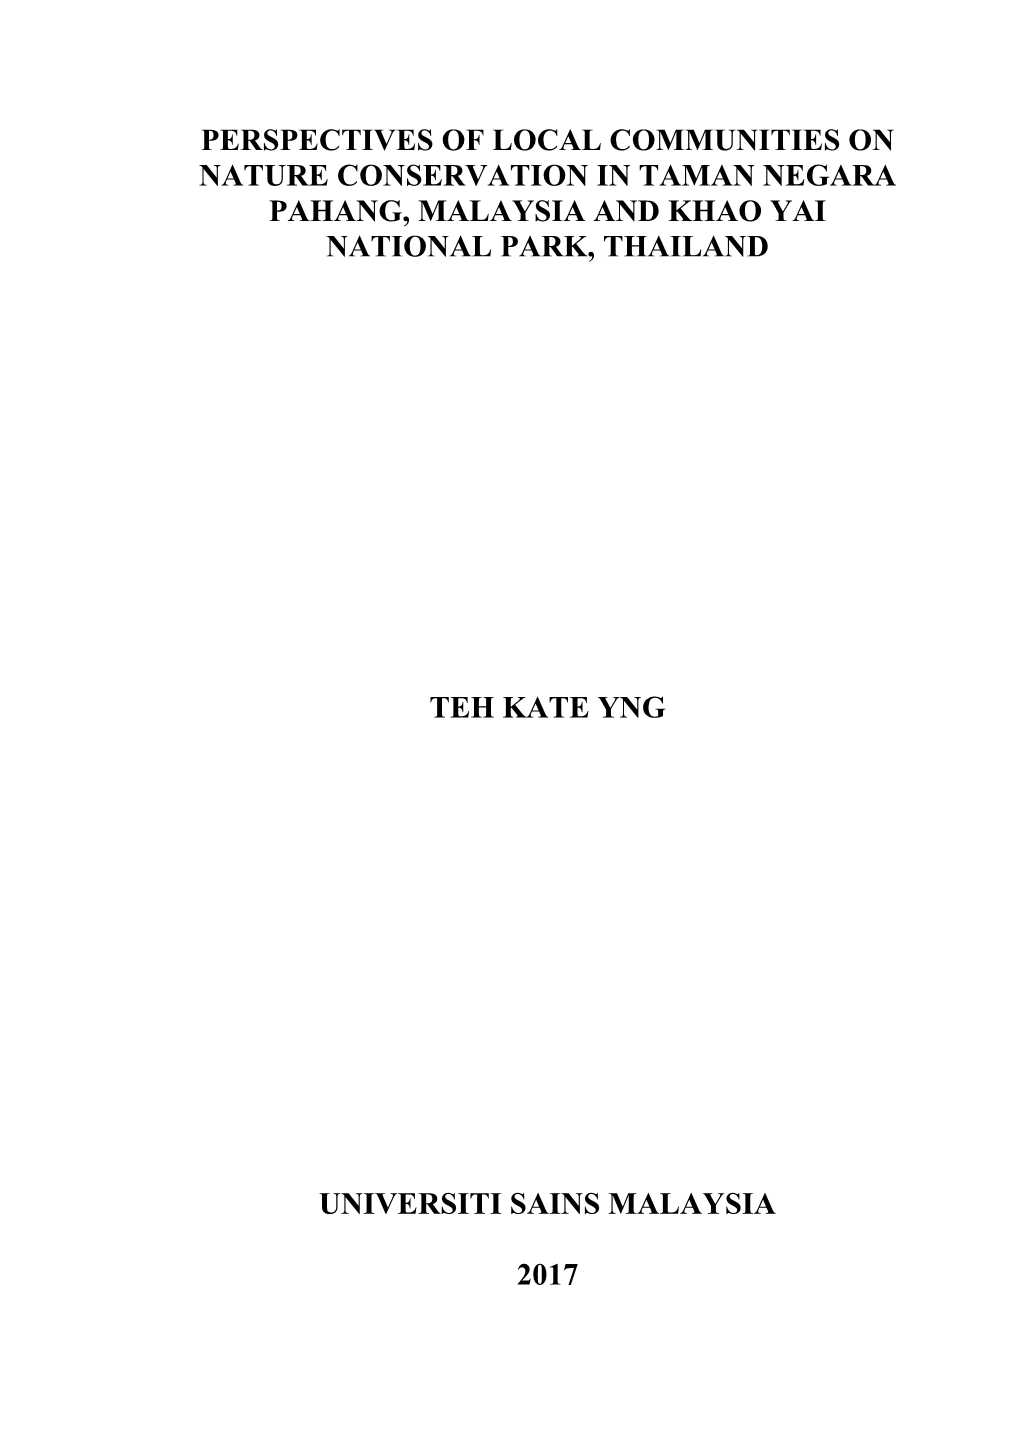 Perspectives of Local Communities on Nature Conservation in Taman Negara Pahang, Malaysia and Khao Yai National Park, Thailand